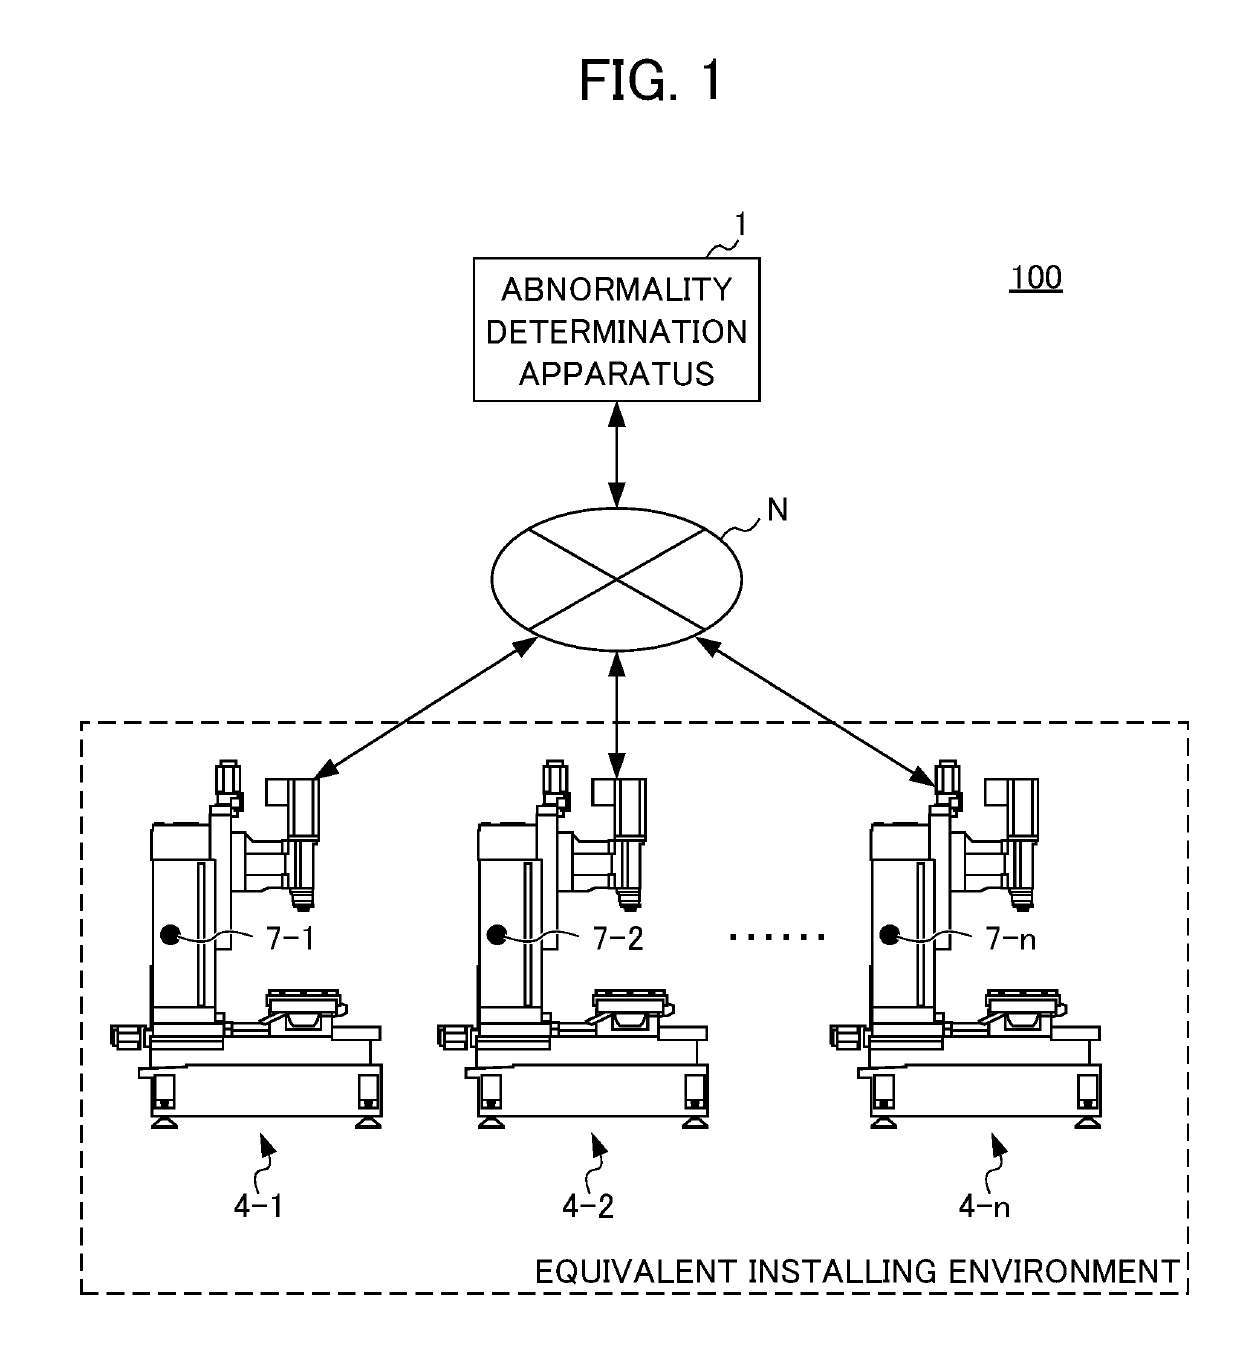 Abnormality determination apparatus, non-transitory computer readable medium encoded with a program, abnormality determination system and abnormality determination method